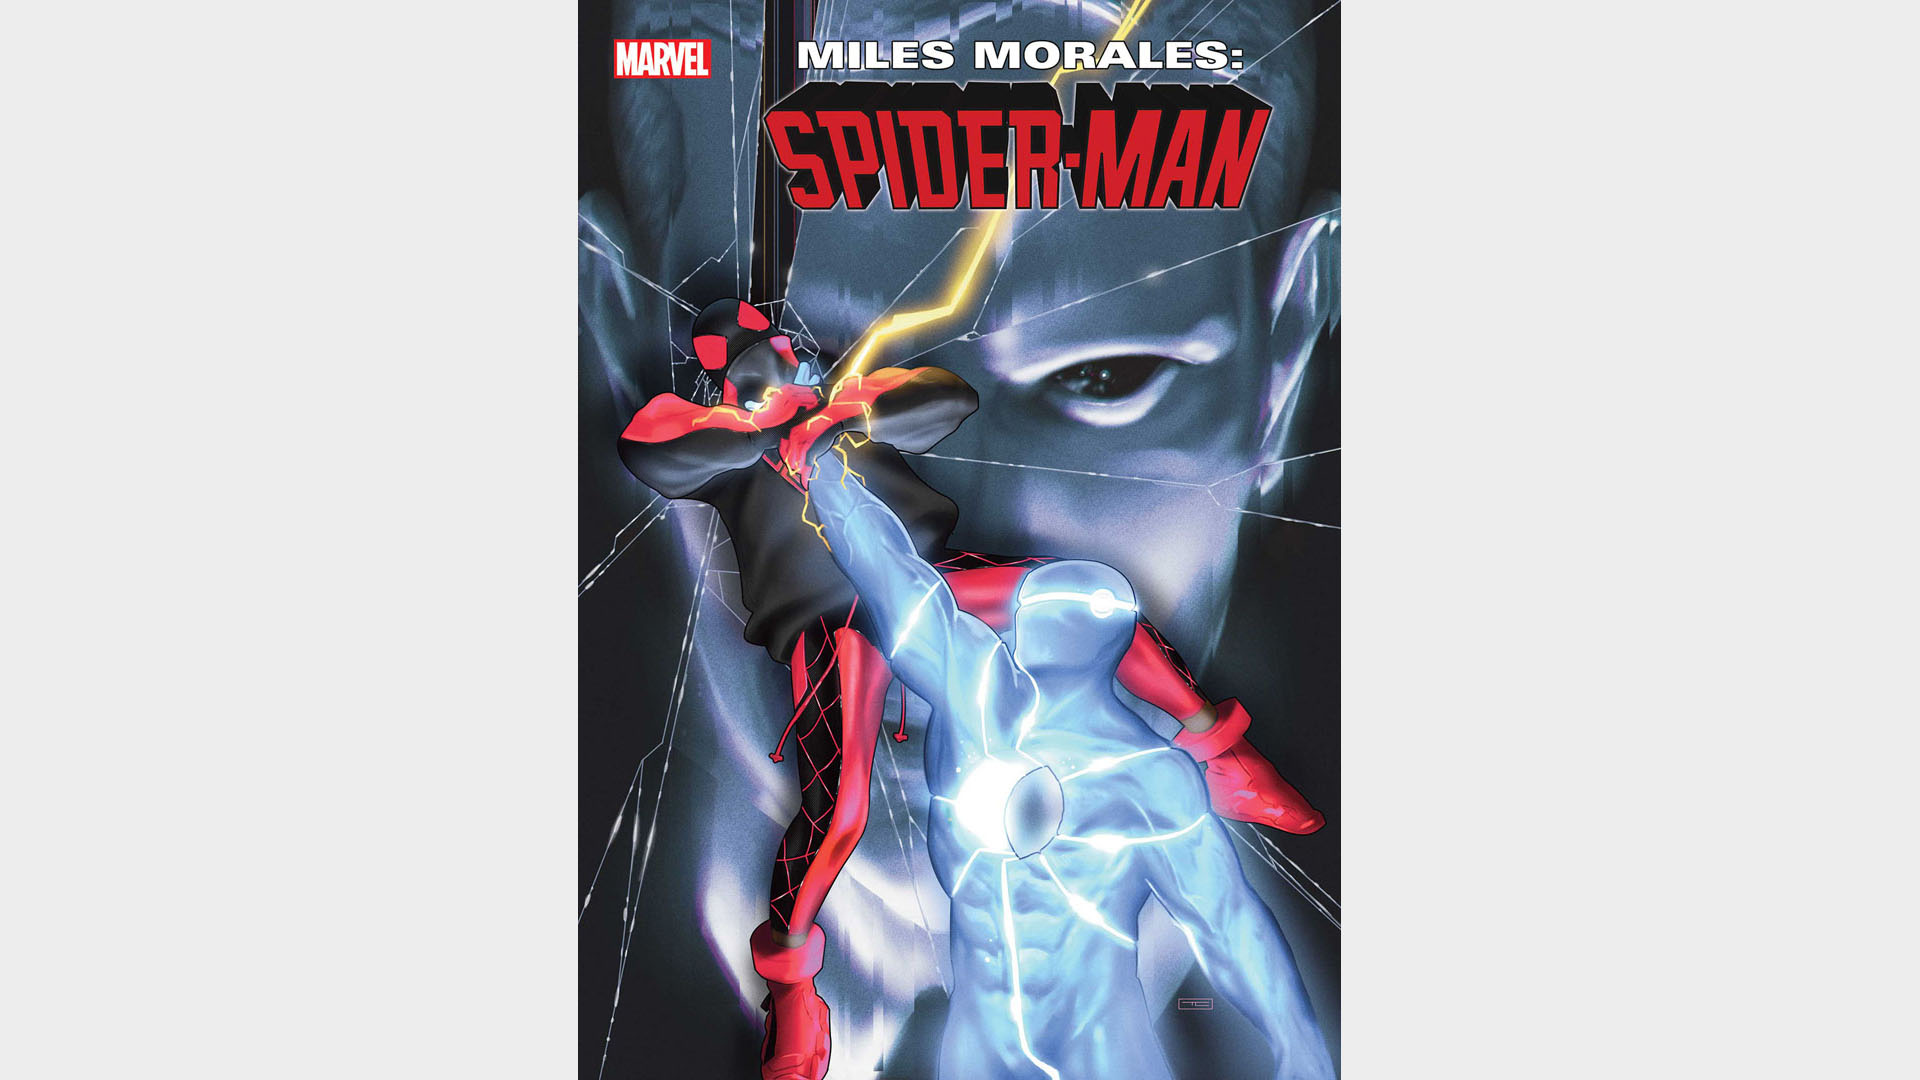 Miles Morales: Spider-Man #35 cover